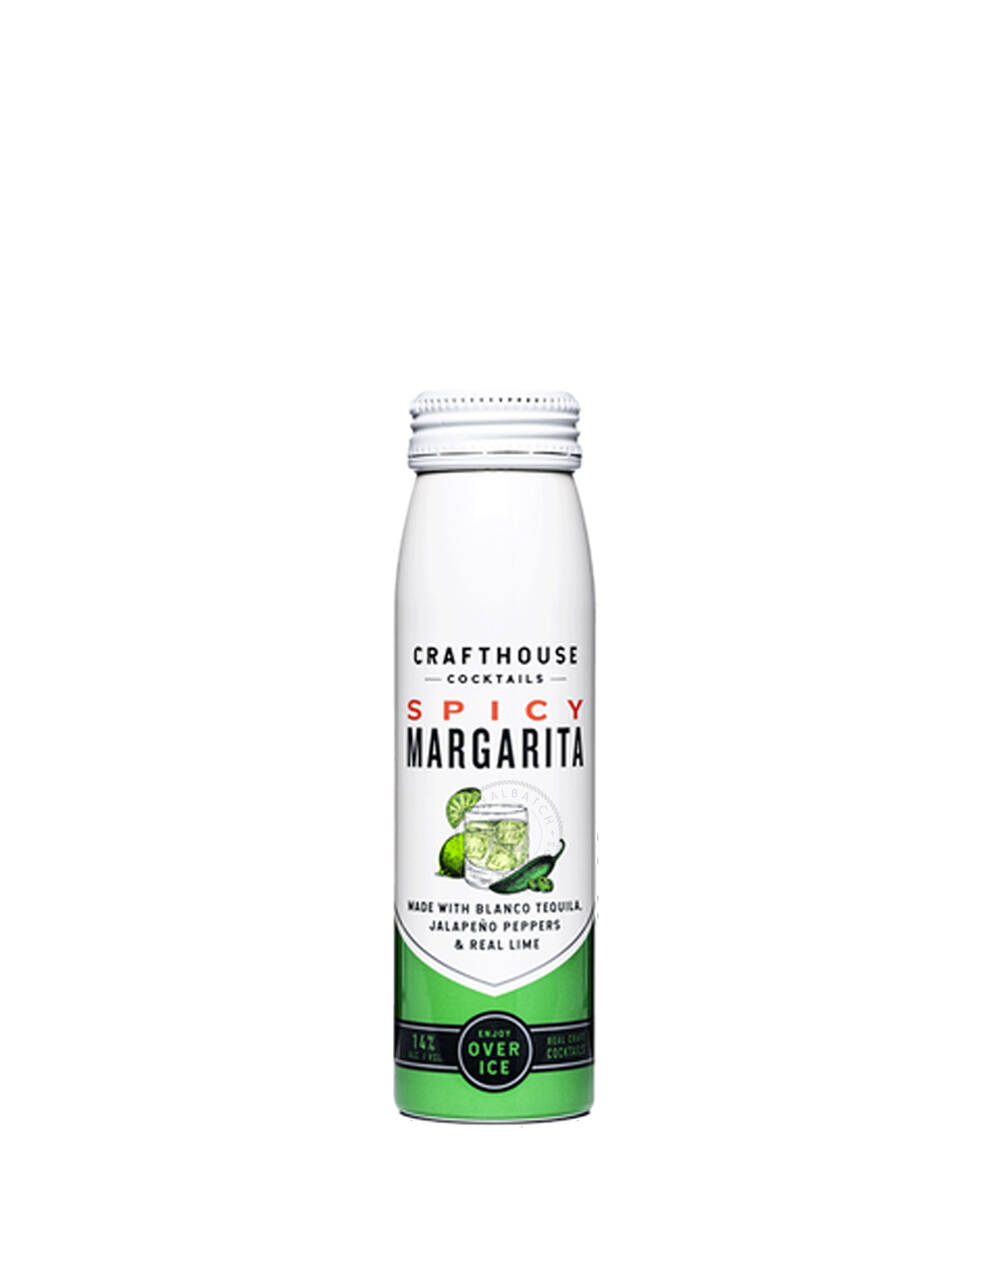 Crafthouse Cocktails Spicy Margarita 1.75L